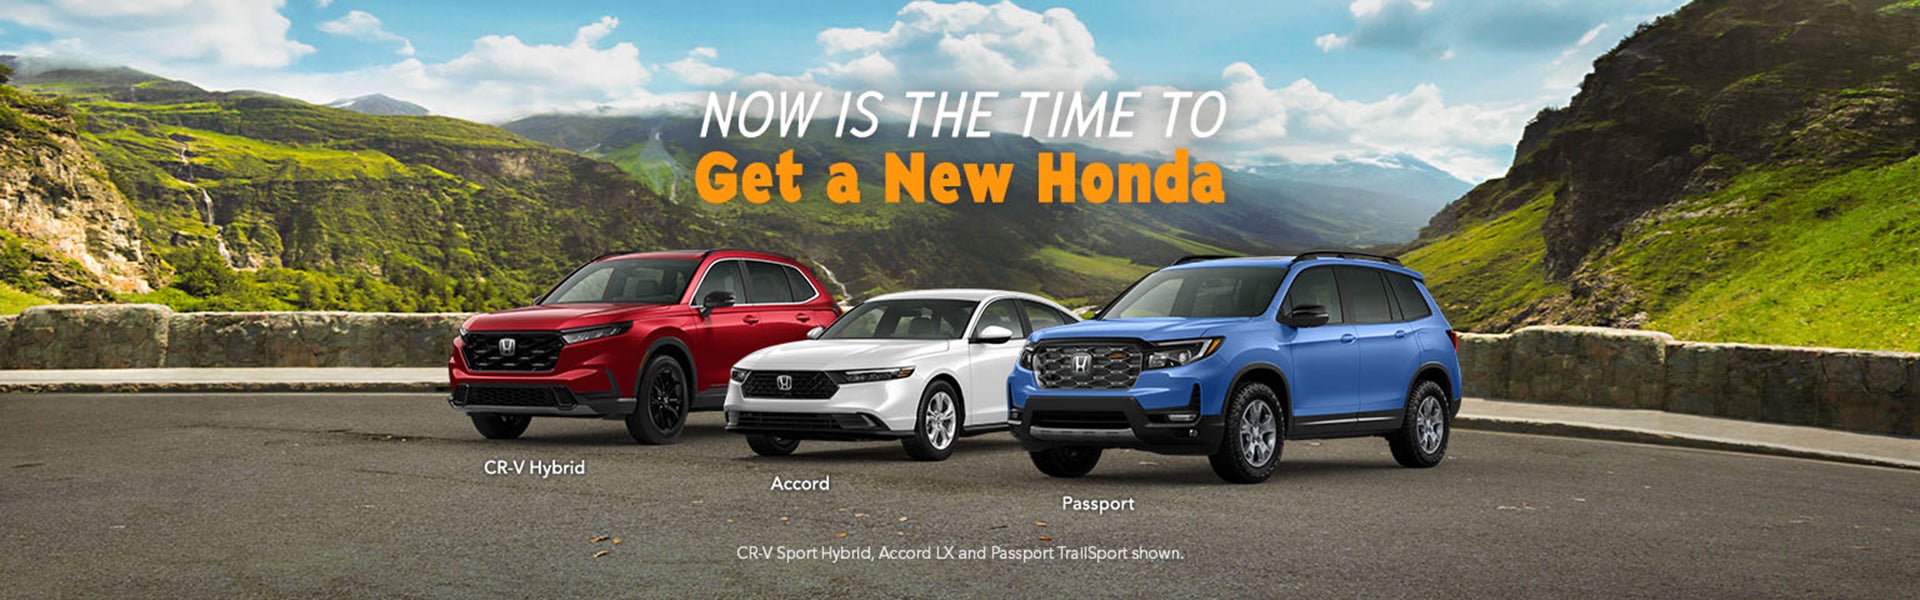 Now's the time to get a new Honda